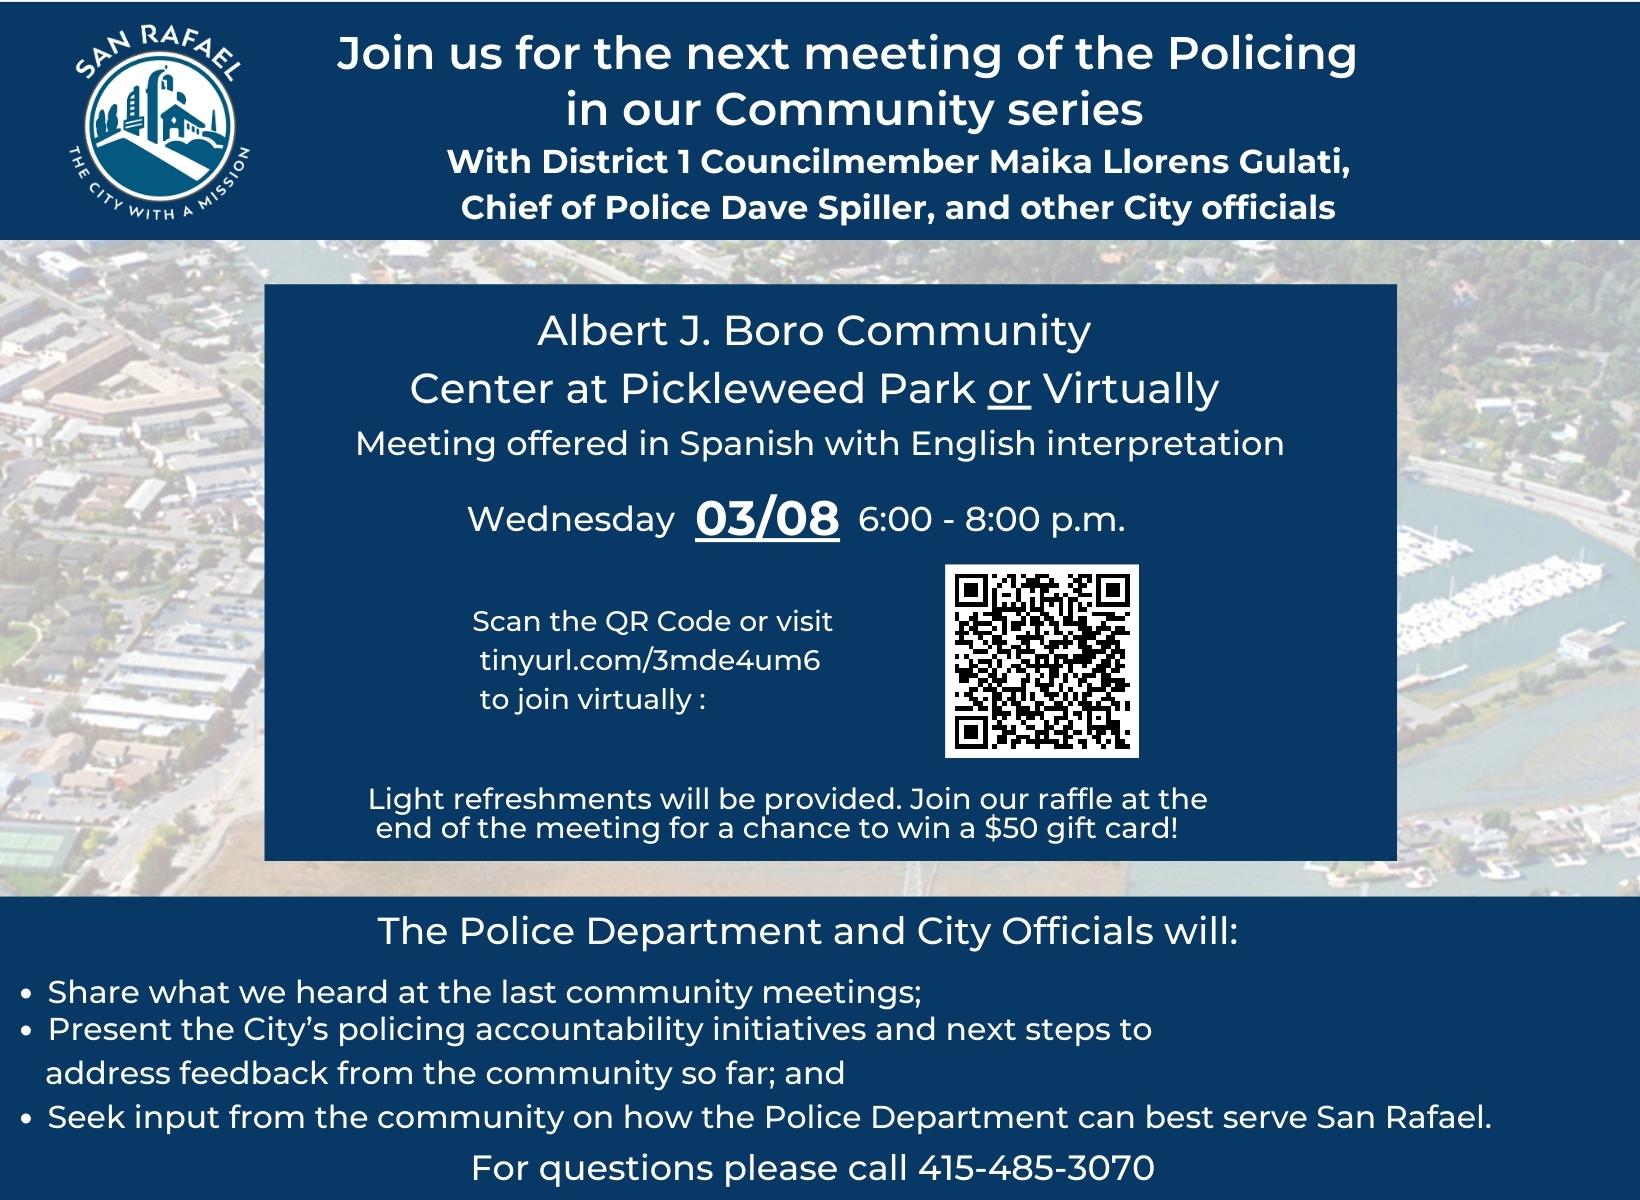 Join Councilmember Maika Llorens Gulati and Chief of Police David Spiller to listen to updates regarding policing in San Rafael. Light refreshments will be provided. March 8th, 2022 – Spanish with English interpretation at Albert J. Boro Community Center at Pickleweed Park from 6:00 p.m. to 8:00 p.m. or join via Zoom at https://tinyurl.com/3mde4um6 - Únase a la Concejal Maika Llorens Gulati y al jefe de policía David Spiller para escuchar las últimas noticias sobre la actividad policial en San Rafael. Se ofrecerán refrescos ligeros. El 8 de marzo de 2022 - Español con interpretación al inglés, en el Centro Comunitario Albert J. Boro del Parque Pickleweed de 6:00 p.m. a 8:00 p.m. o únase a través de Zoom, https://tinyurl.com/3mde4um6 Join us for the next meeting of the Policing in our Community series With District 1 Councilmember Maika Llorens Gulati, Chief of Police Dave Spiller, and other City officials. At Albert J. Boro Community Center at Pickleweed Park or Virtually. Meeting offered in Spanish with English interpretation. Wednesday 3, 2023 from 6-8 p.m. Scan the QR Code or visit tinyurl.com/3mde4um6 to join virtually. Light refreshments will be provided. Join our raffle at the end of the meeting for a chance to win a $50 gift card! The Police Department and City Officials will: Share what we heard at the last community meetings; Present the City’s policing accountability initiatives and next steps to address feedback from the community so far; and Seek input from the community on how the Police Department can best serve San Rafael. For questions please call 415-485-3070